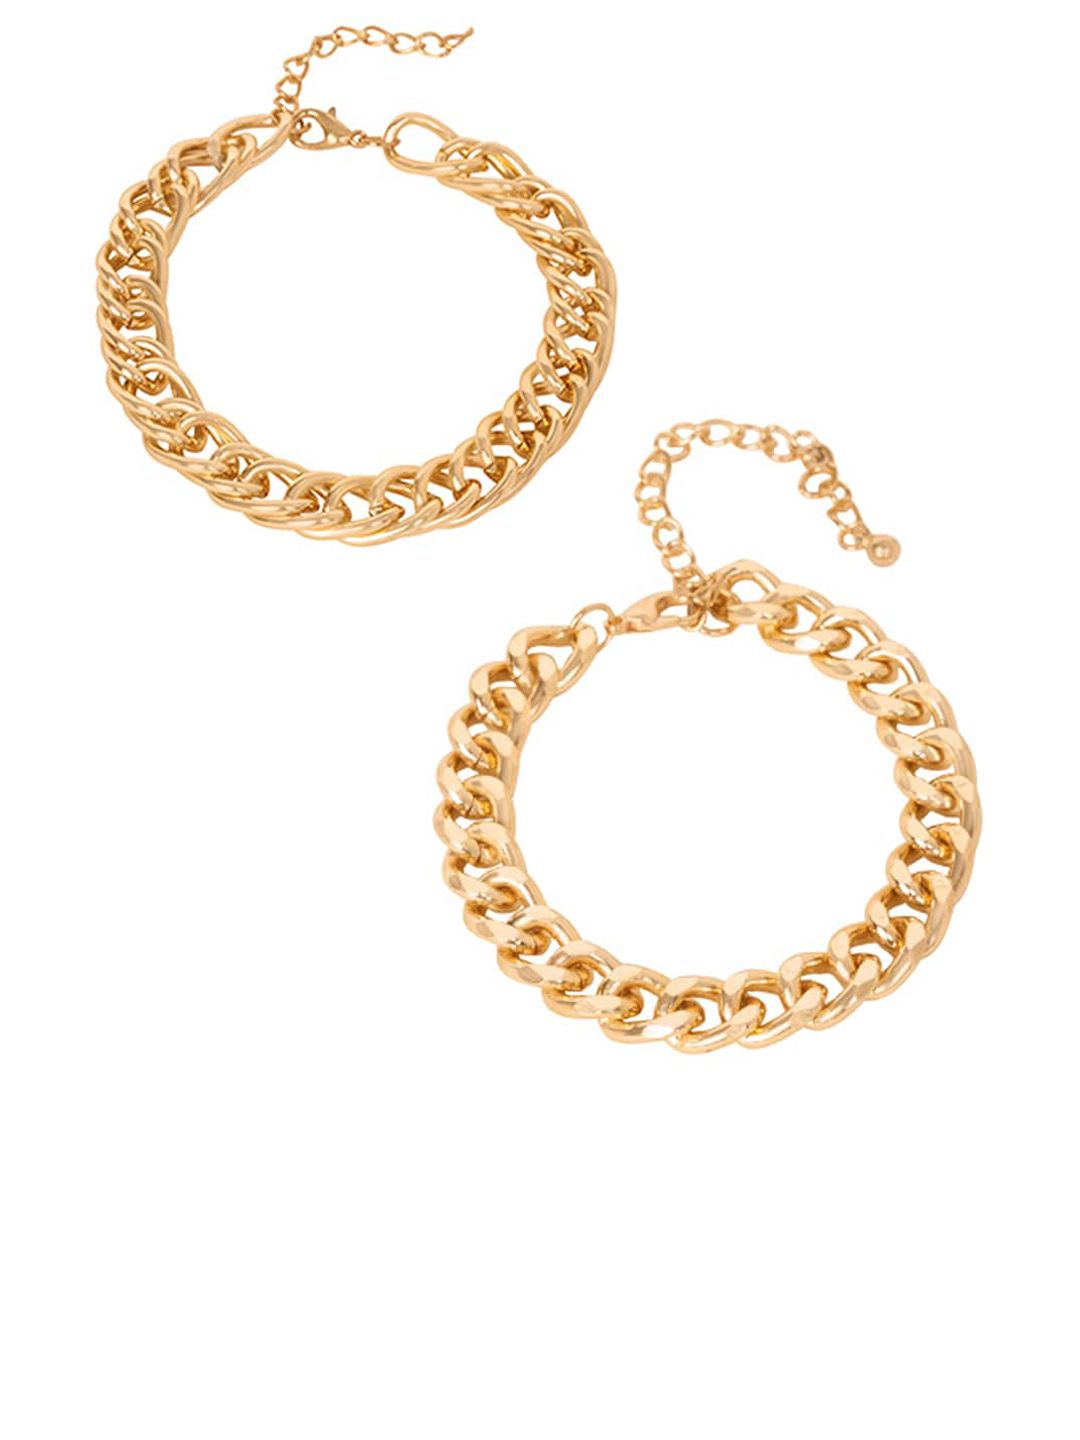 FabAlley Women Set of 2 Gold-Plated Link Bracelets Price in India